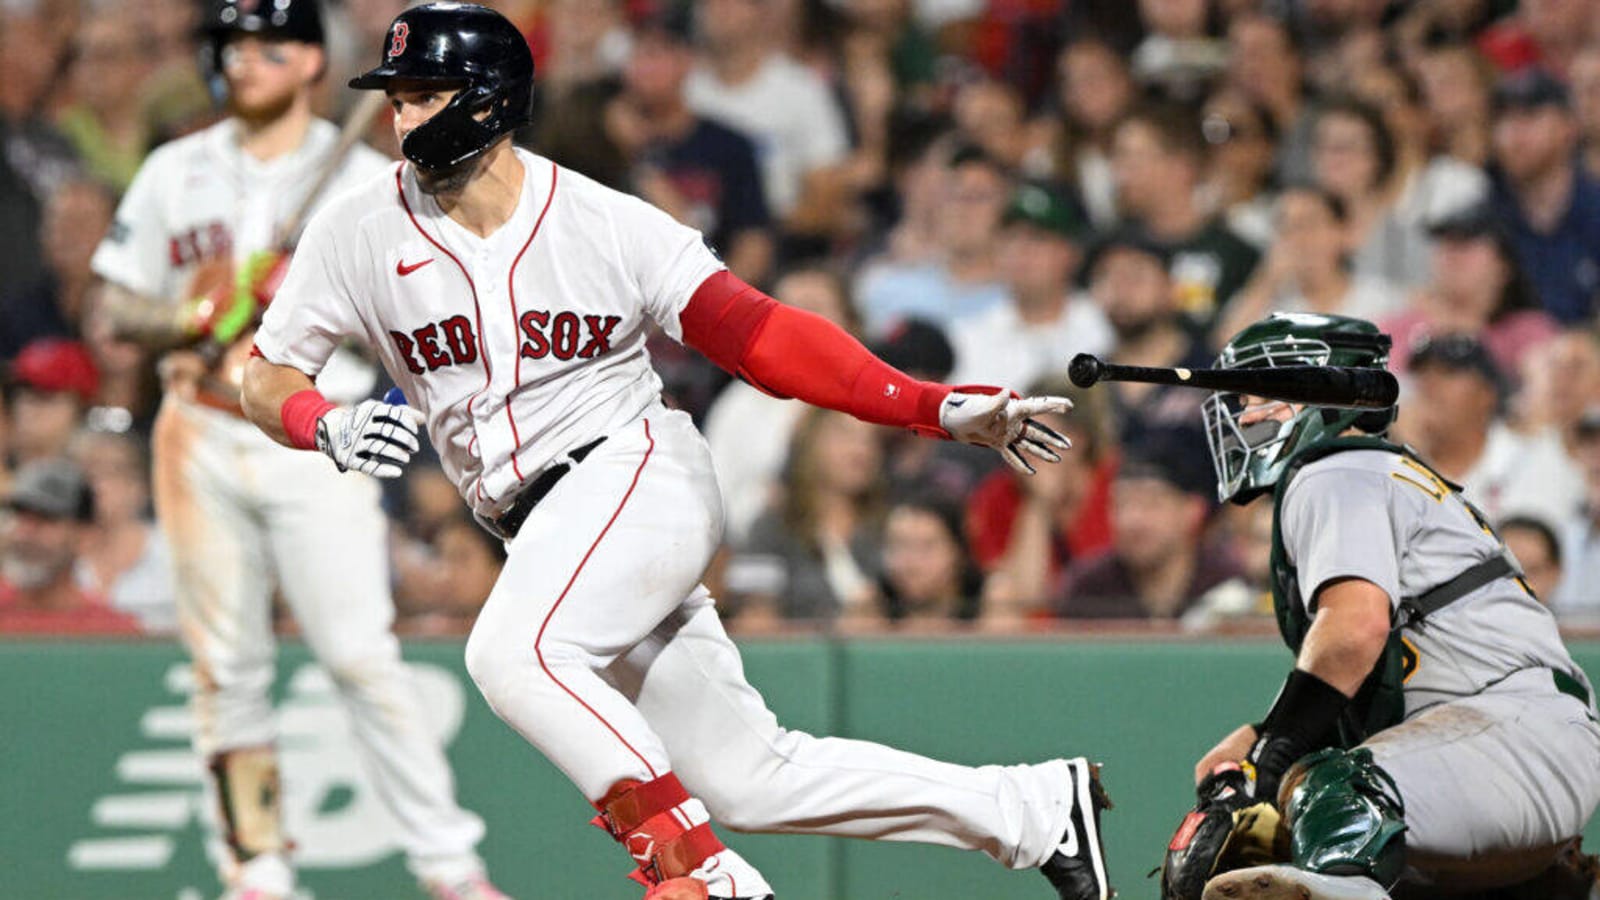 Watch Boston Red Sox vs Oakland Athletics for free in the US MLB live stream, start time and TV channel Yardbarker